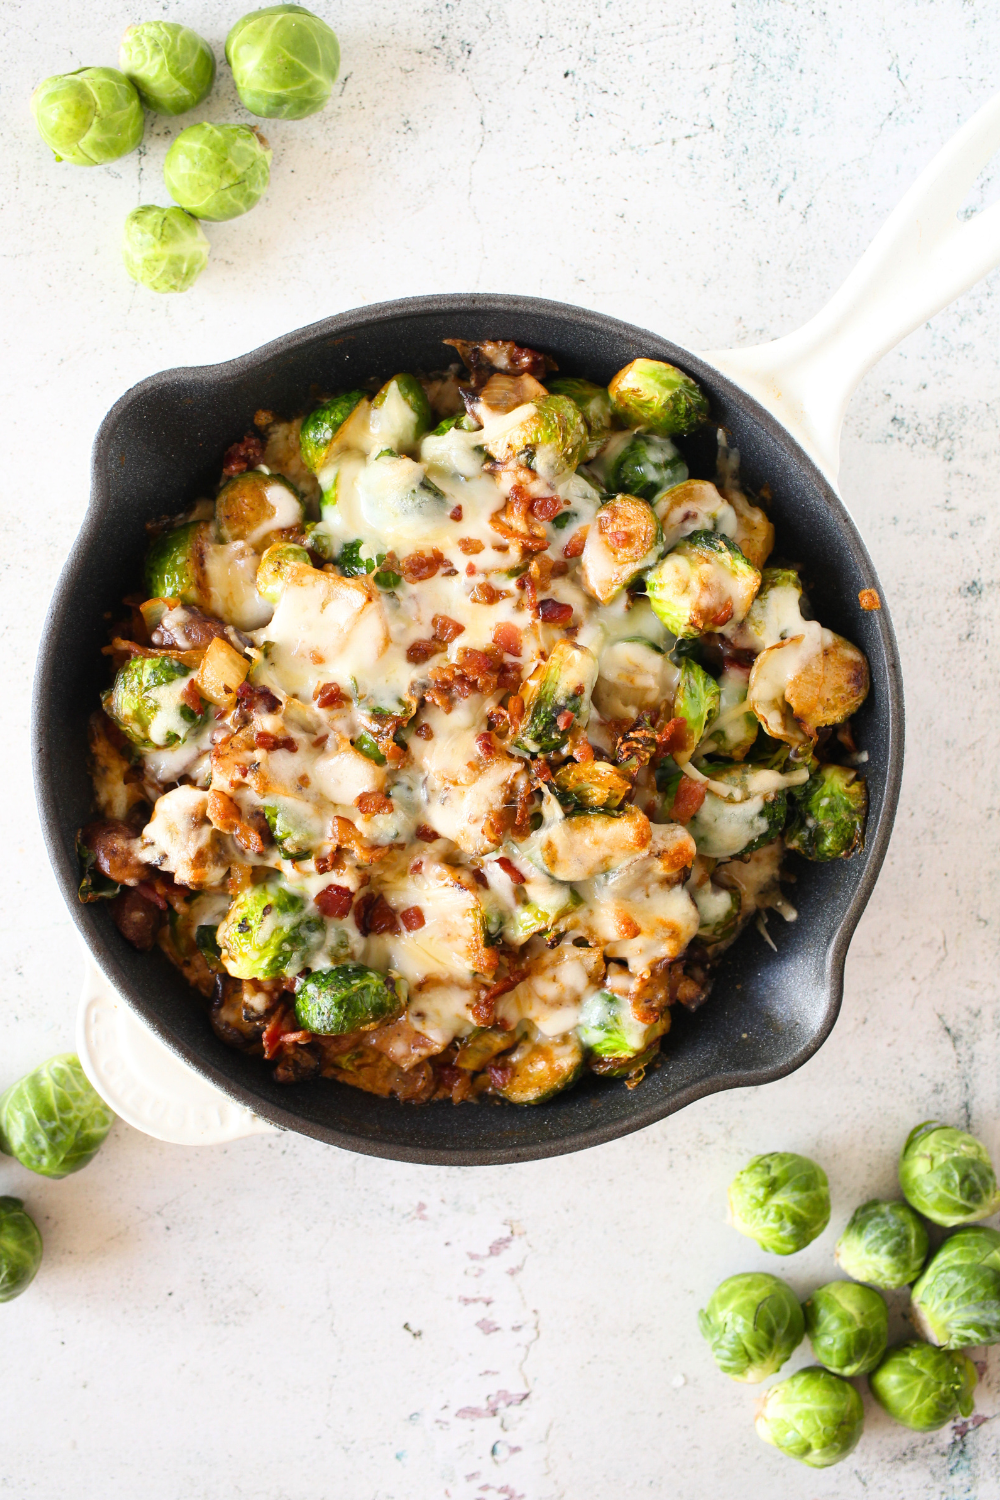 top view of a skillet filled with keto cheesy Brussels sprouts casserole with bacon, mushroom and onion. Brussels sprouts scattered around the easy keto side dish